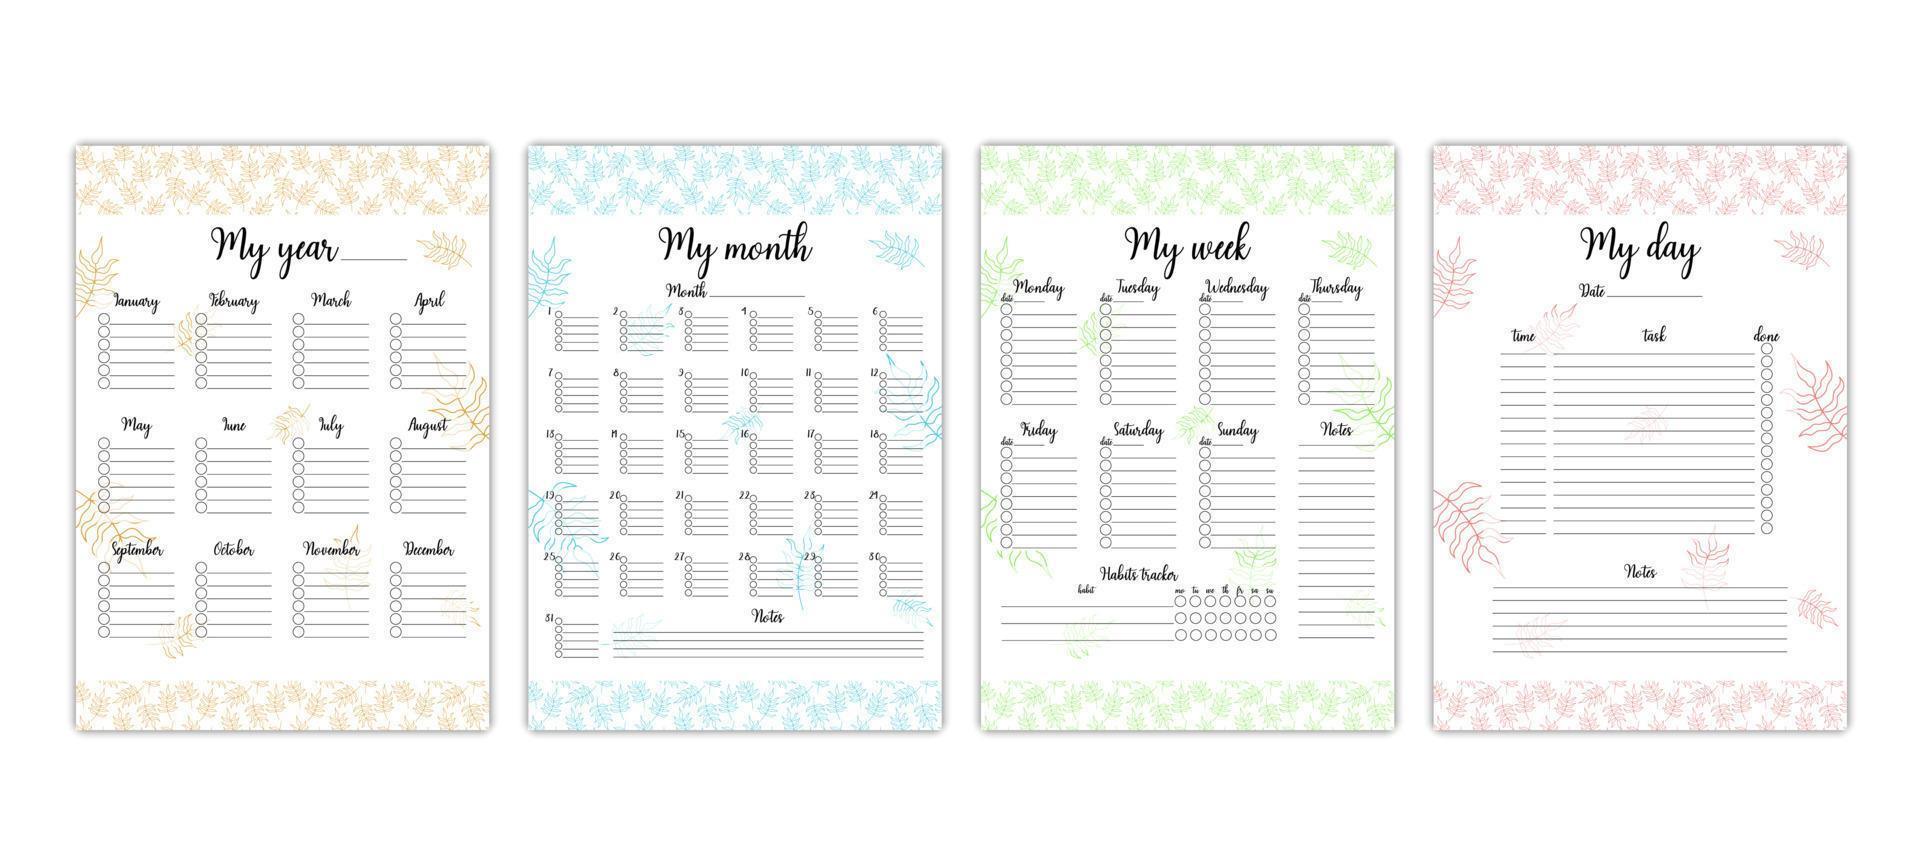 Planner templates. Vector set of colorful printable task organizers for year, month, week and day. Blank personal planner book pages. Tropical leaf design